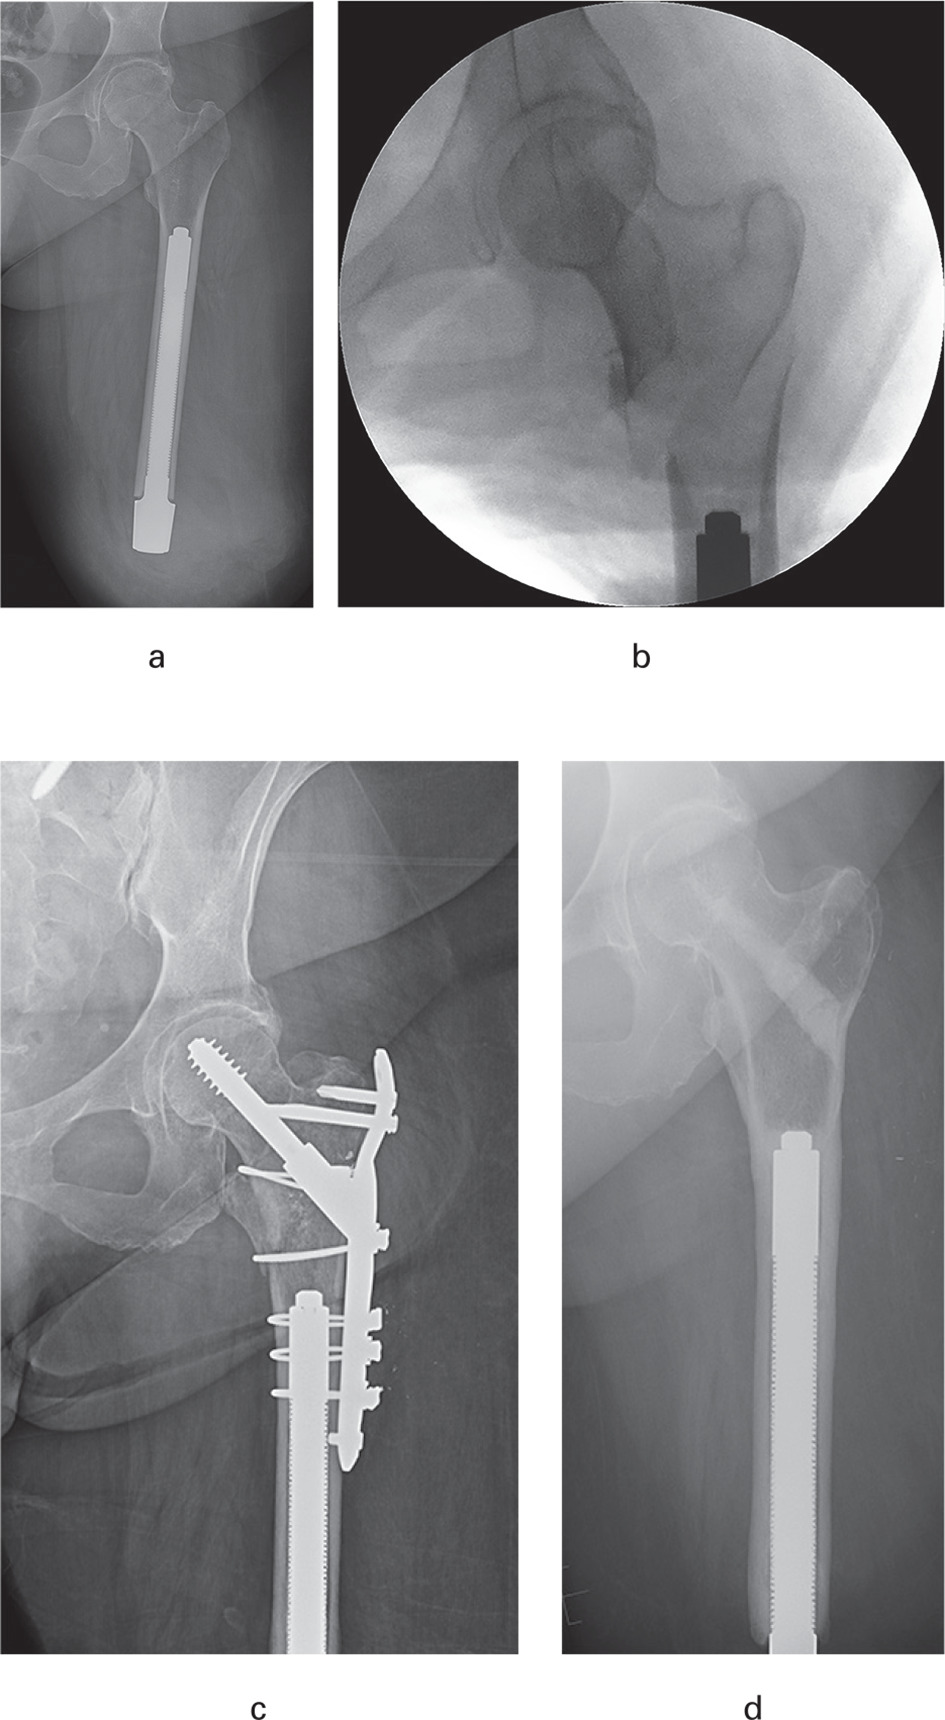 Fig. 5 
          Anteroposterior radiographs (Figures a, c, and d) and image intensification (b) of a 64-year-old woman who had a left transfemoral amputation for chronic infection after total knee arthroplasty; a) immediate postosseointegration appearance (15 years and two months after amputation); b) she sustained an intertrochanteric fracture eight months later; c) she was treated with a hybrid dynamic hip screw with features of a reconstruction plate; d) there was persistent discomfort and the hardware was removed one year later. She has not needed further care in the subsequent six years. Her K-level improved from 0 before osseointegration to 3 after fracture care, and her prosthesis wear improved from 0 hours with a socket, due to severe silicone and latex allergies, to ≥ 16 hours/day, currently.
        